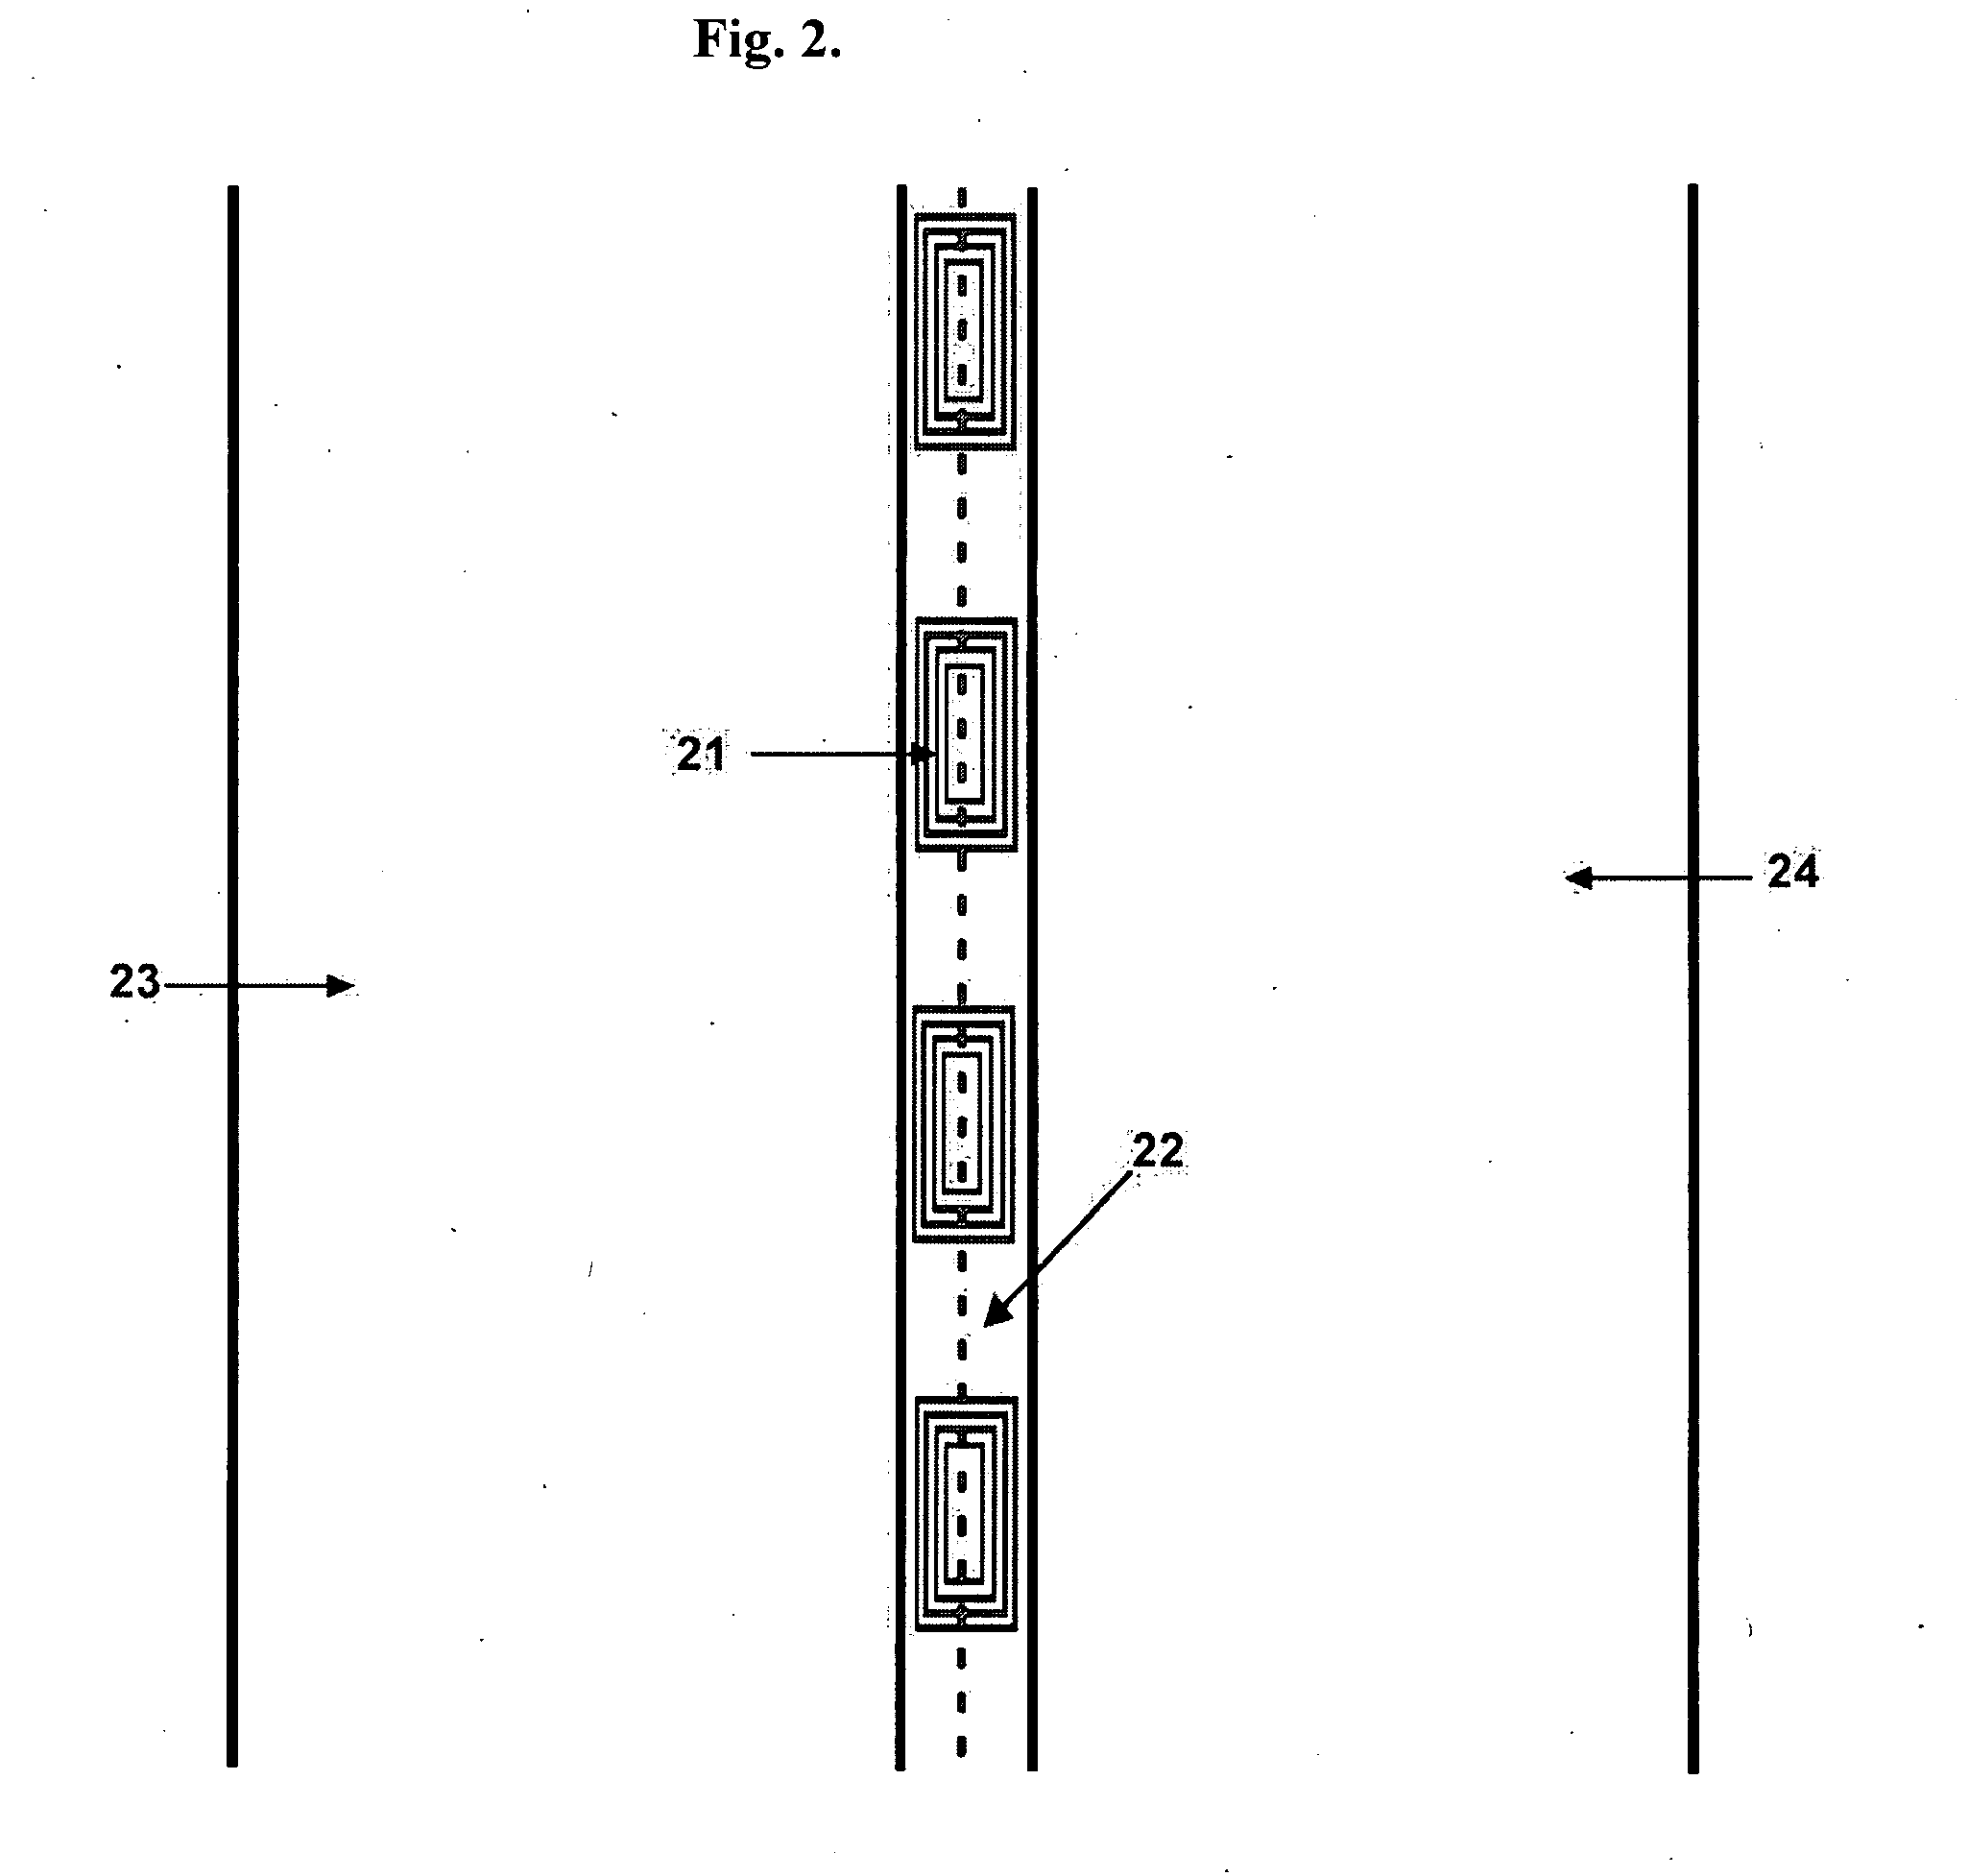 Tracking lane marker position through use of information-transmiting device